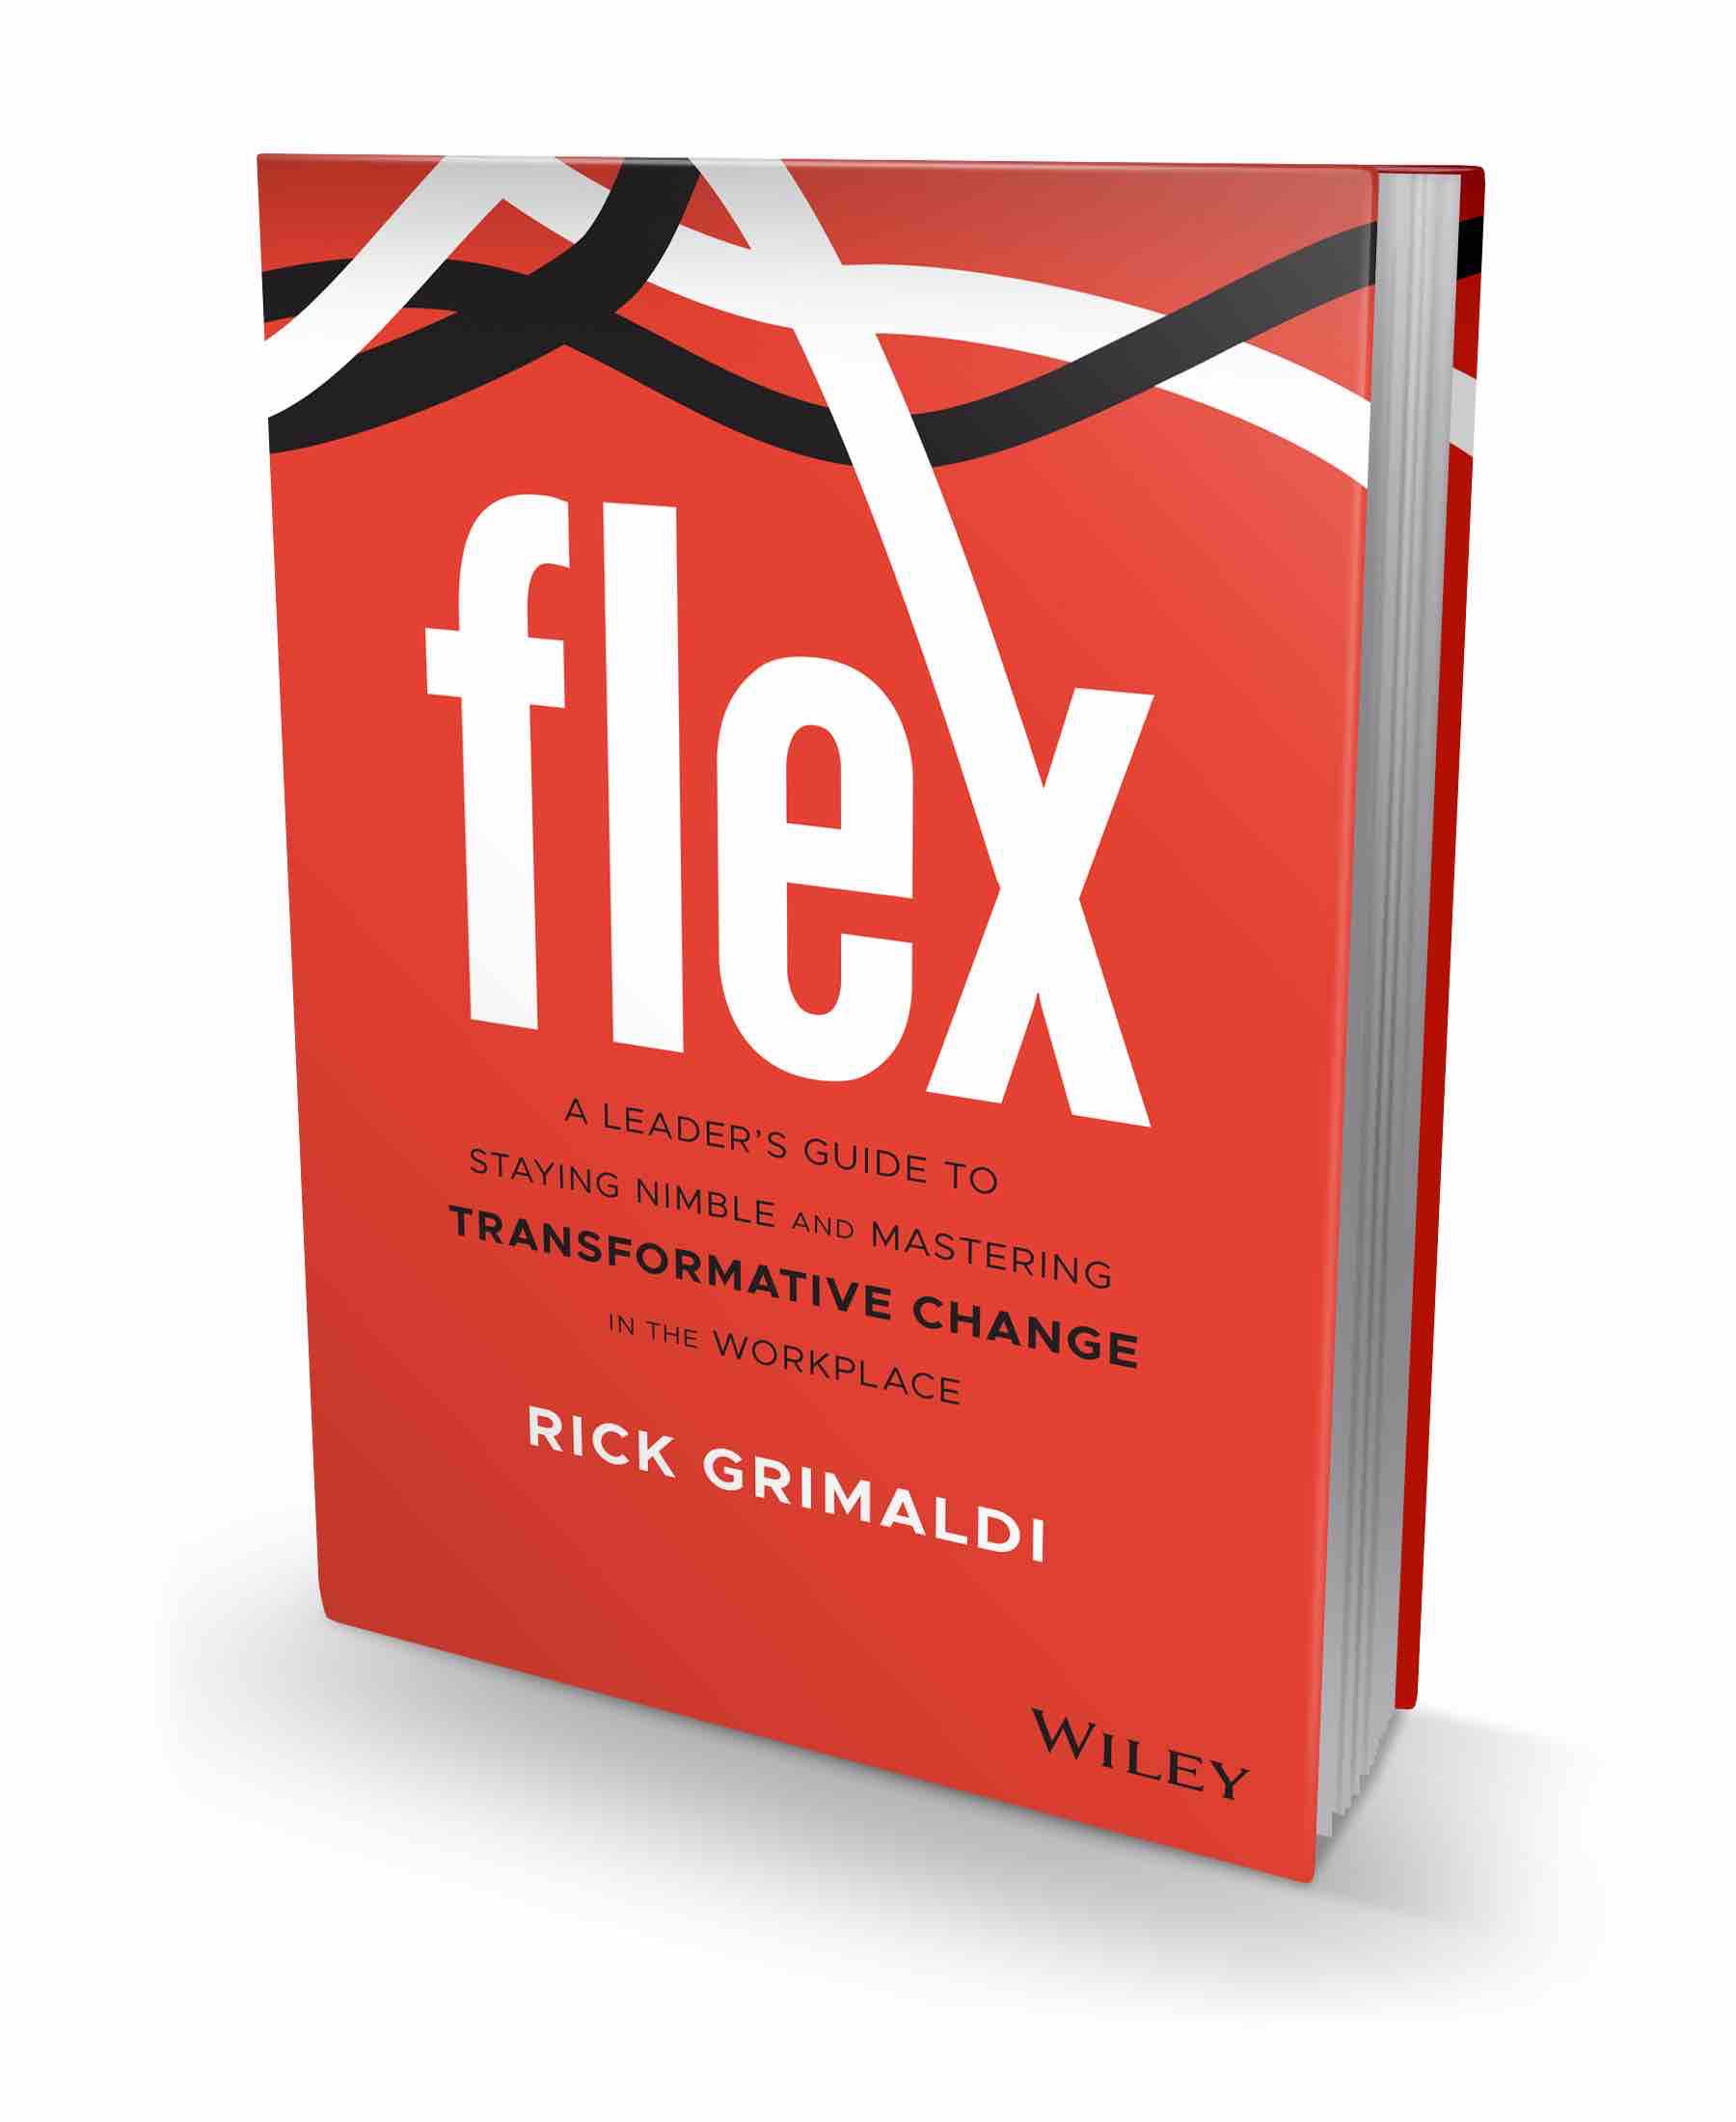 Decorative image for Flex and increase employee satisfaction